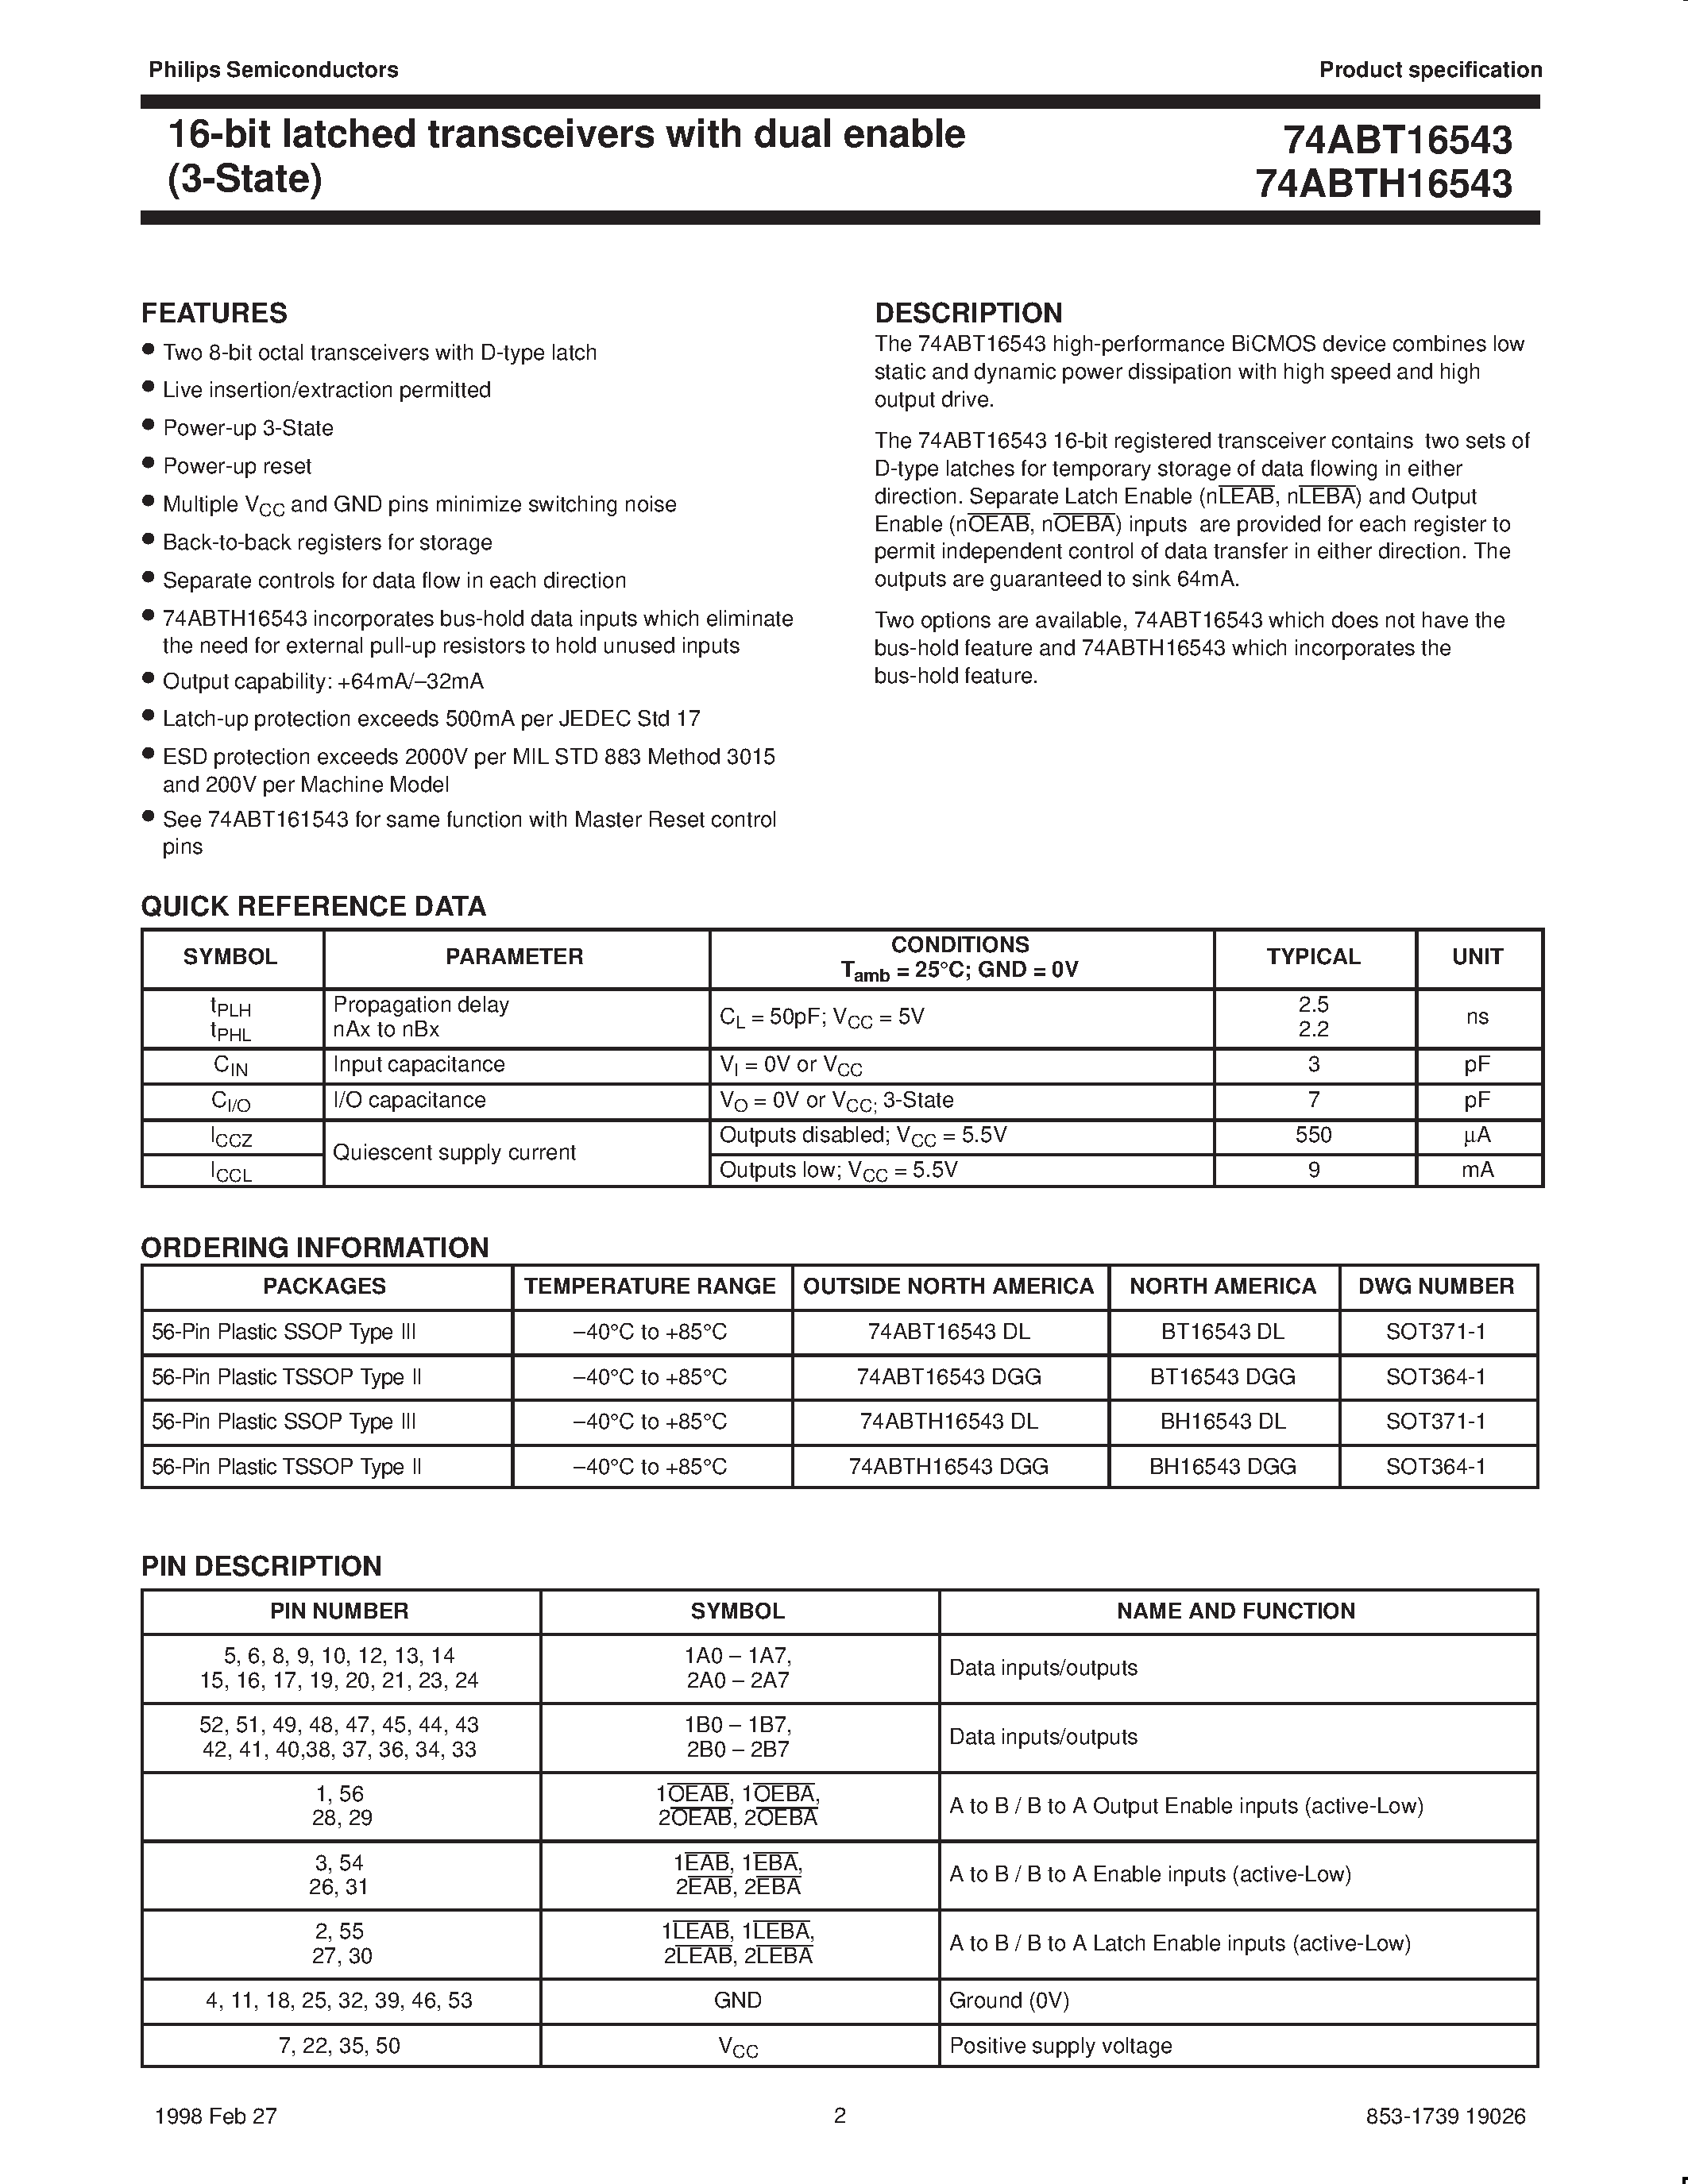 Datasheet 74ABTH16543DL - 16-bit latched transceivers with dual enable 3-State page 2